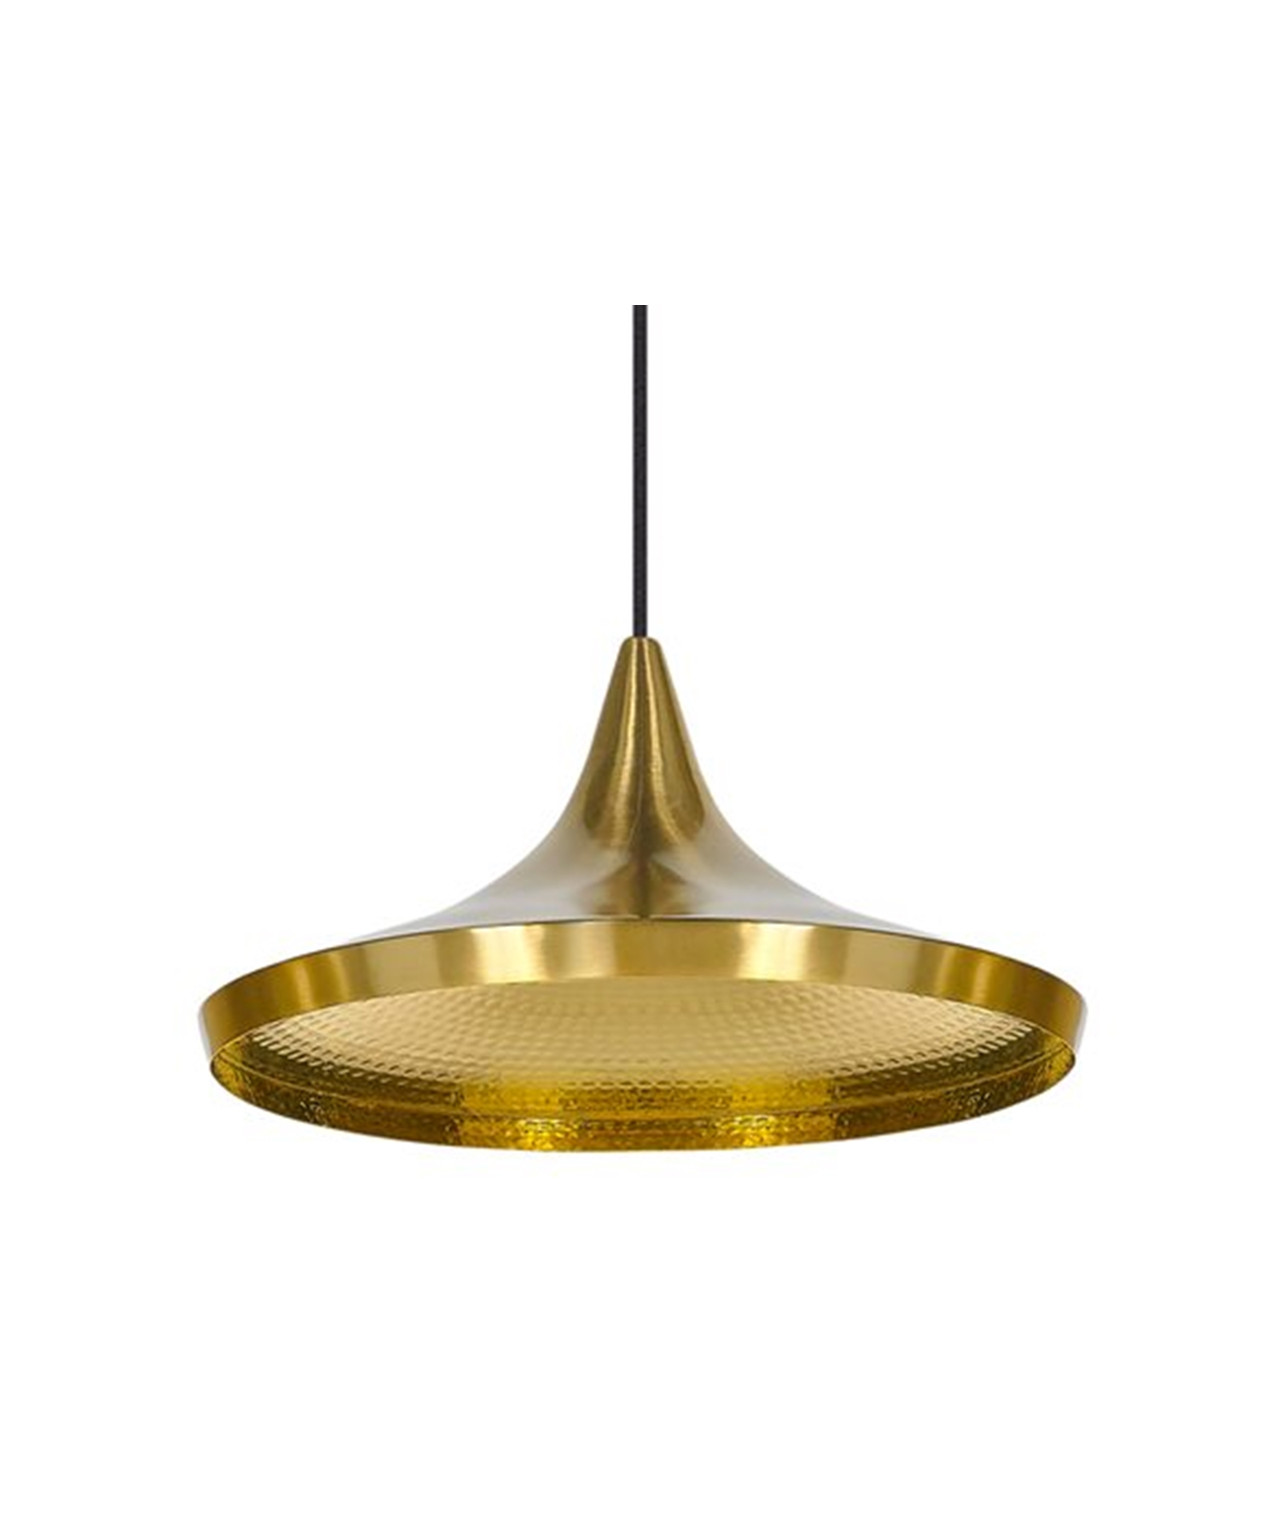 Image of Beat Light Wide LED Pendelleuchte Messing - Tom Dixon bei Lampenmeister.ch